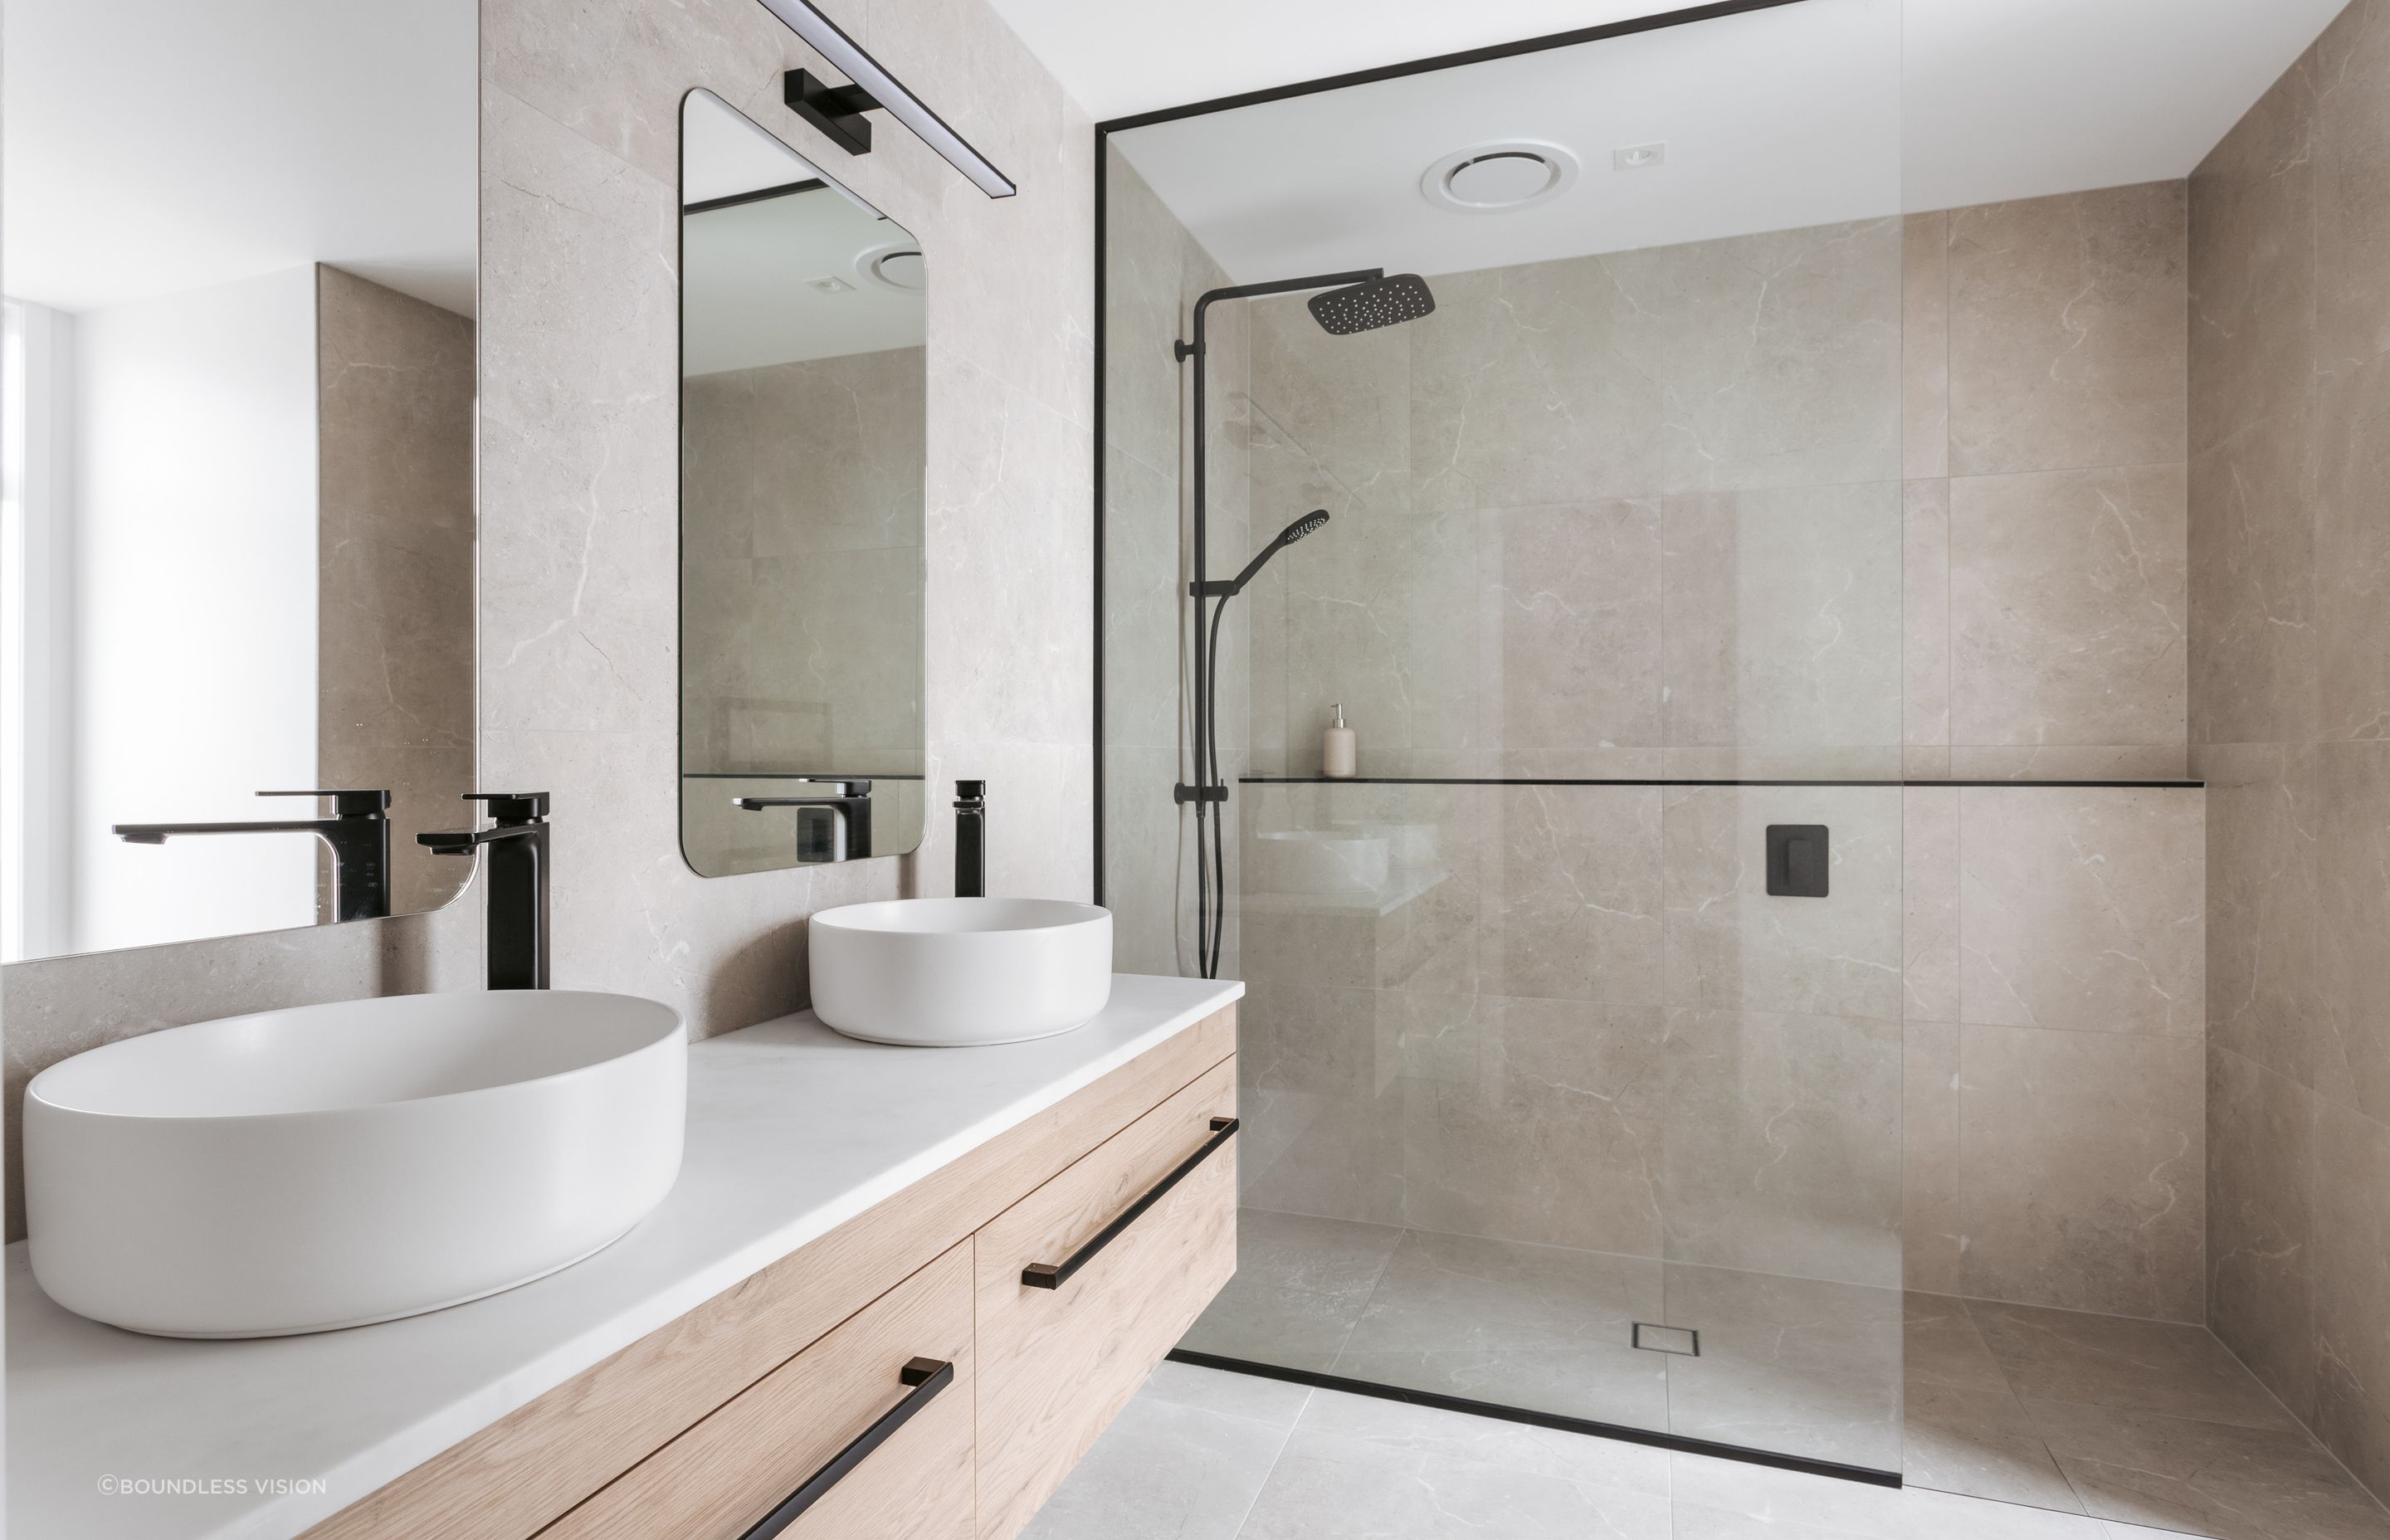 The master ensuite is fitted with double vanities and a walk-in shower.